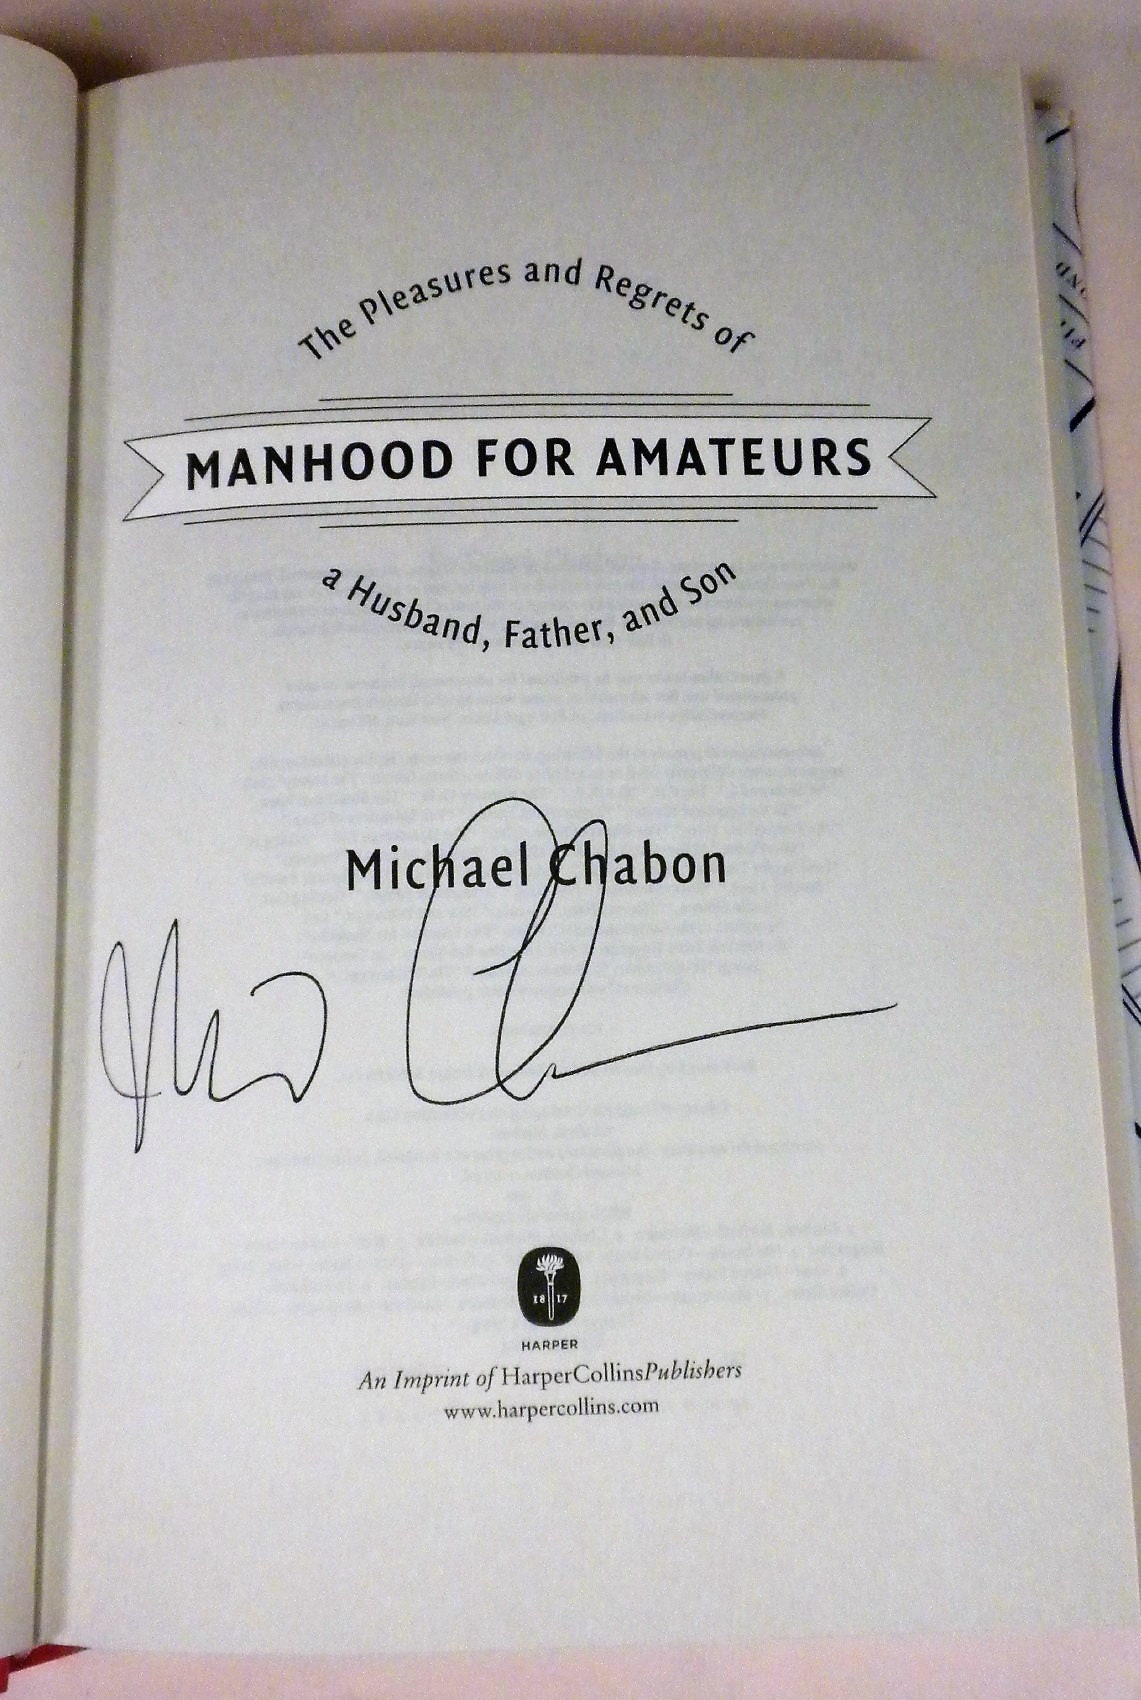 SIGNED Manhood for Amateurs the Pleasures and Regrets of a